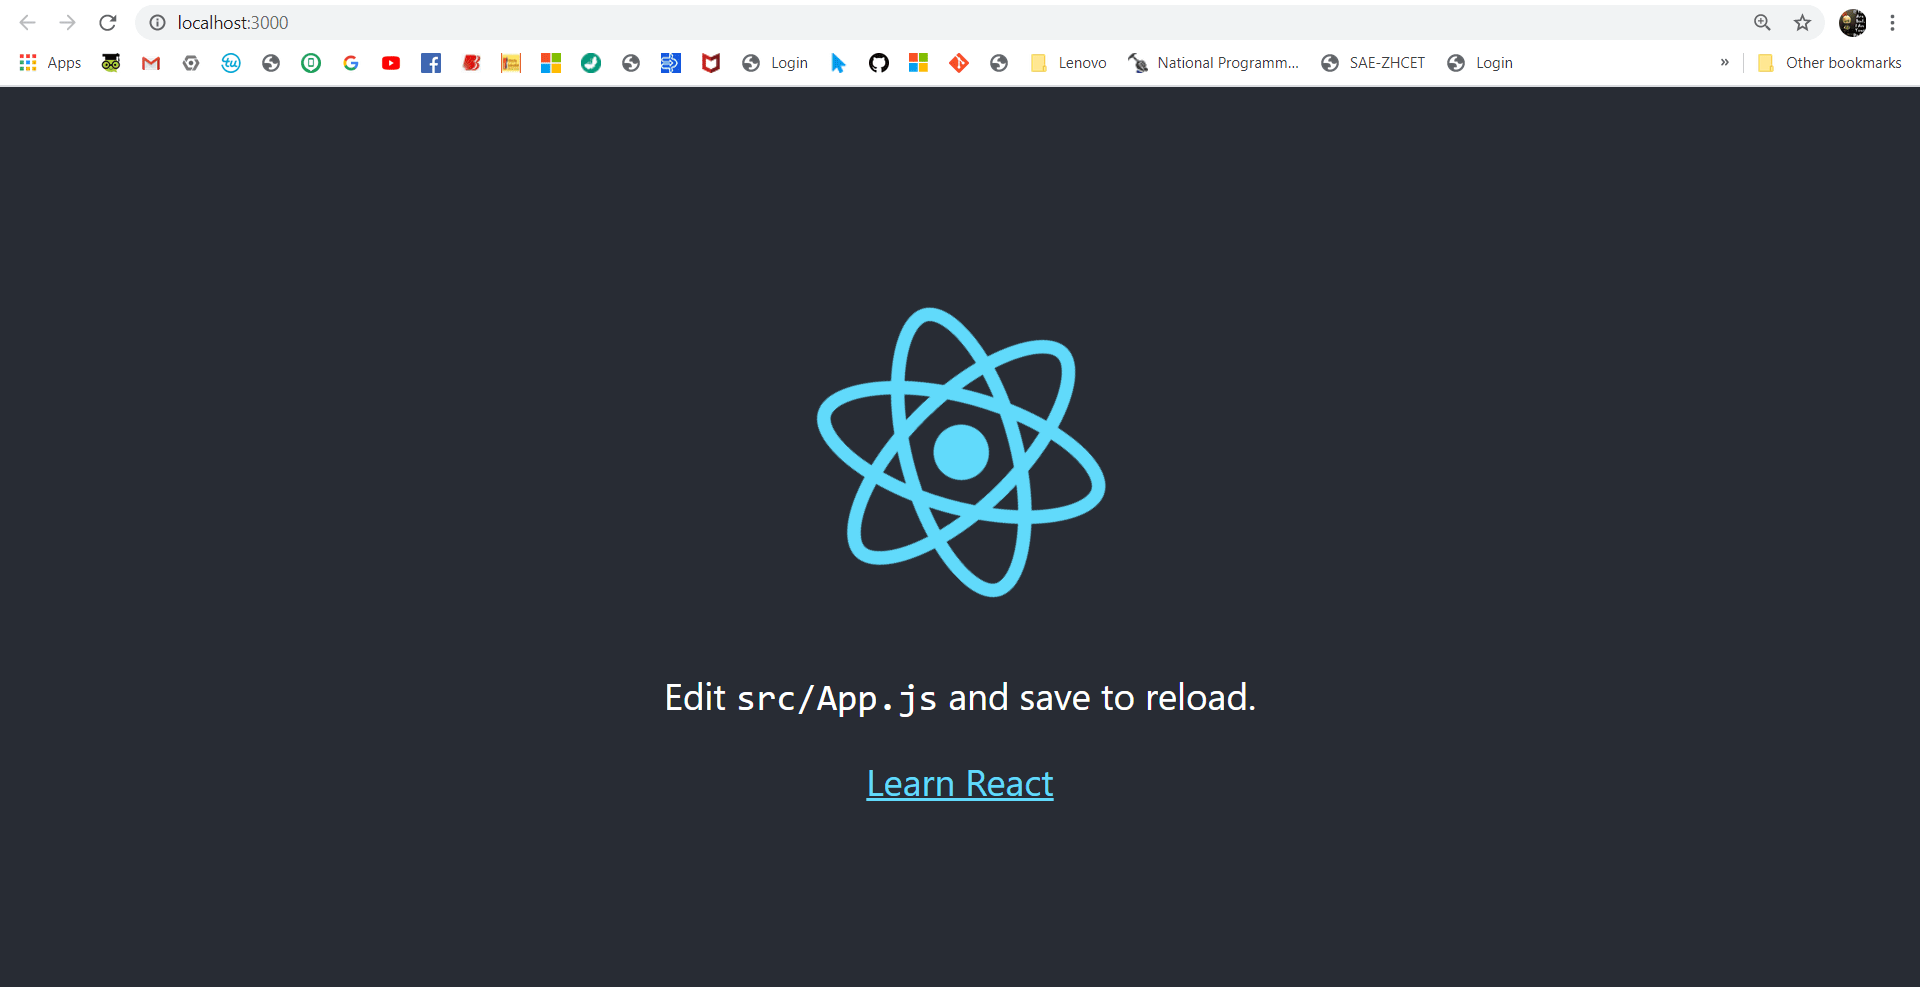 React is a Javascript Library for building user interface. It is open source. Its main focus is on building user interface. React has a component base